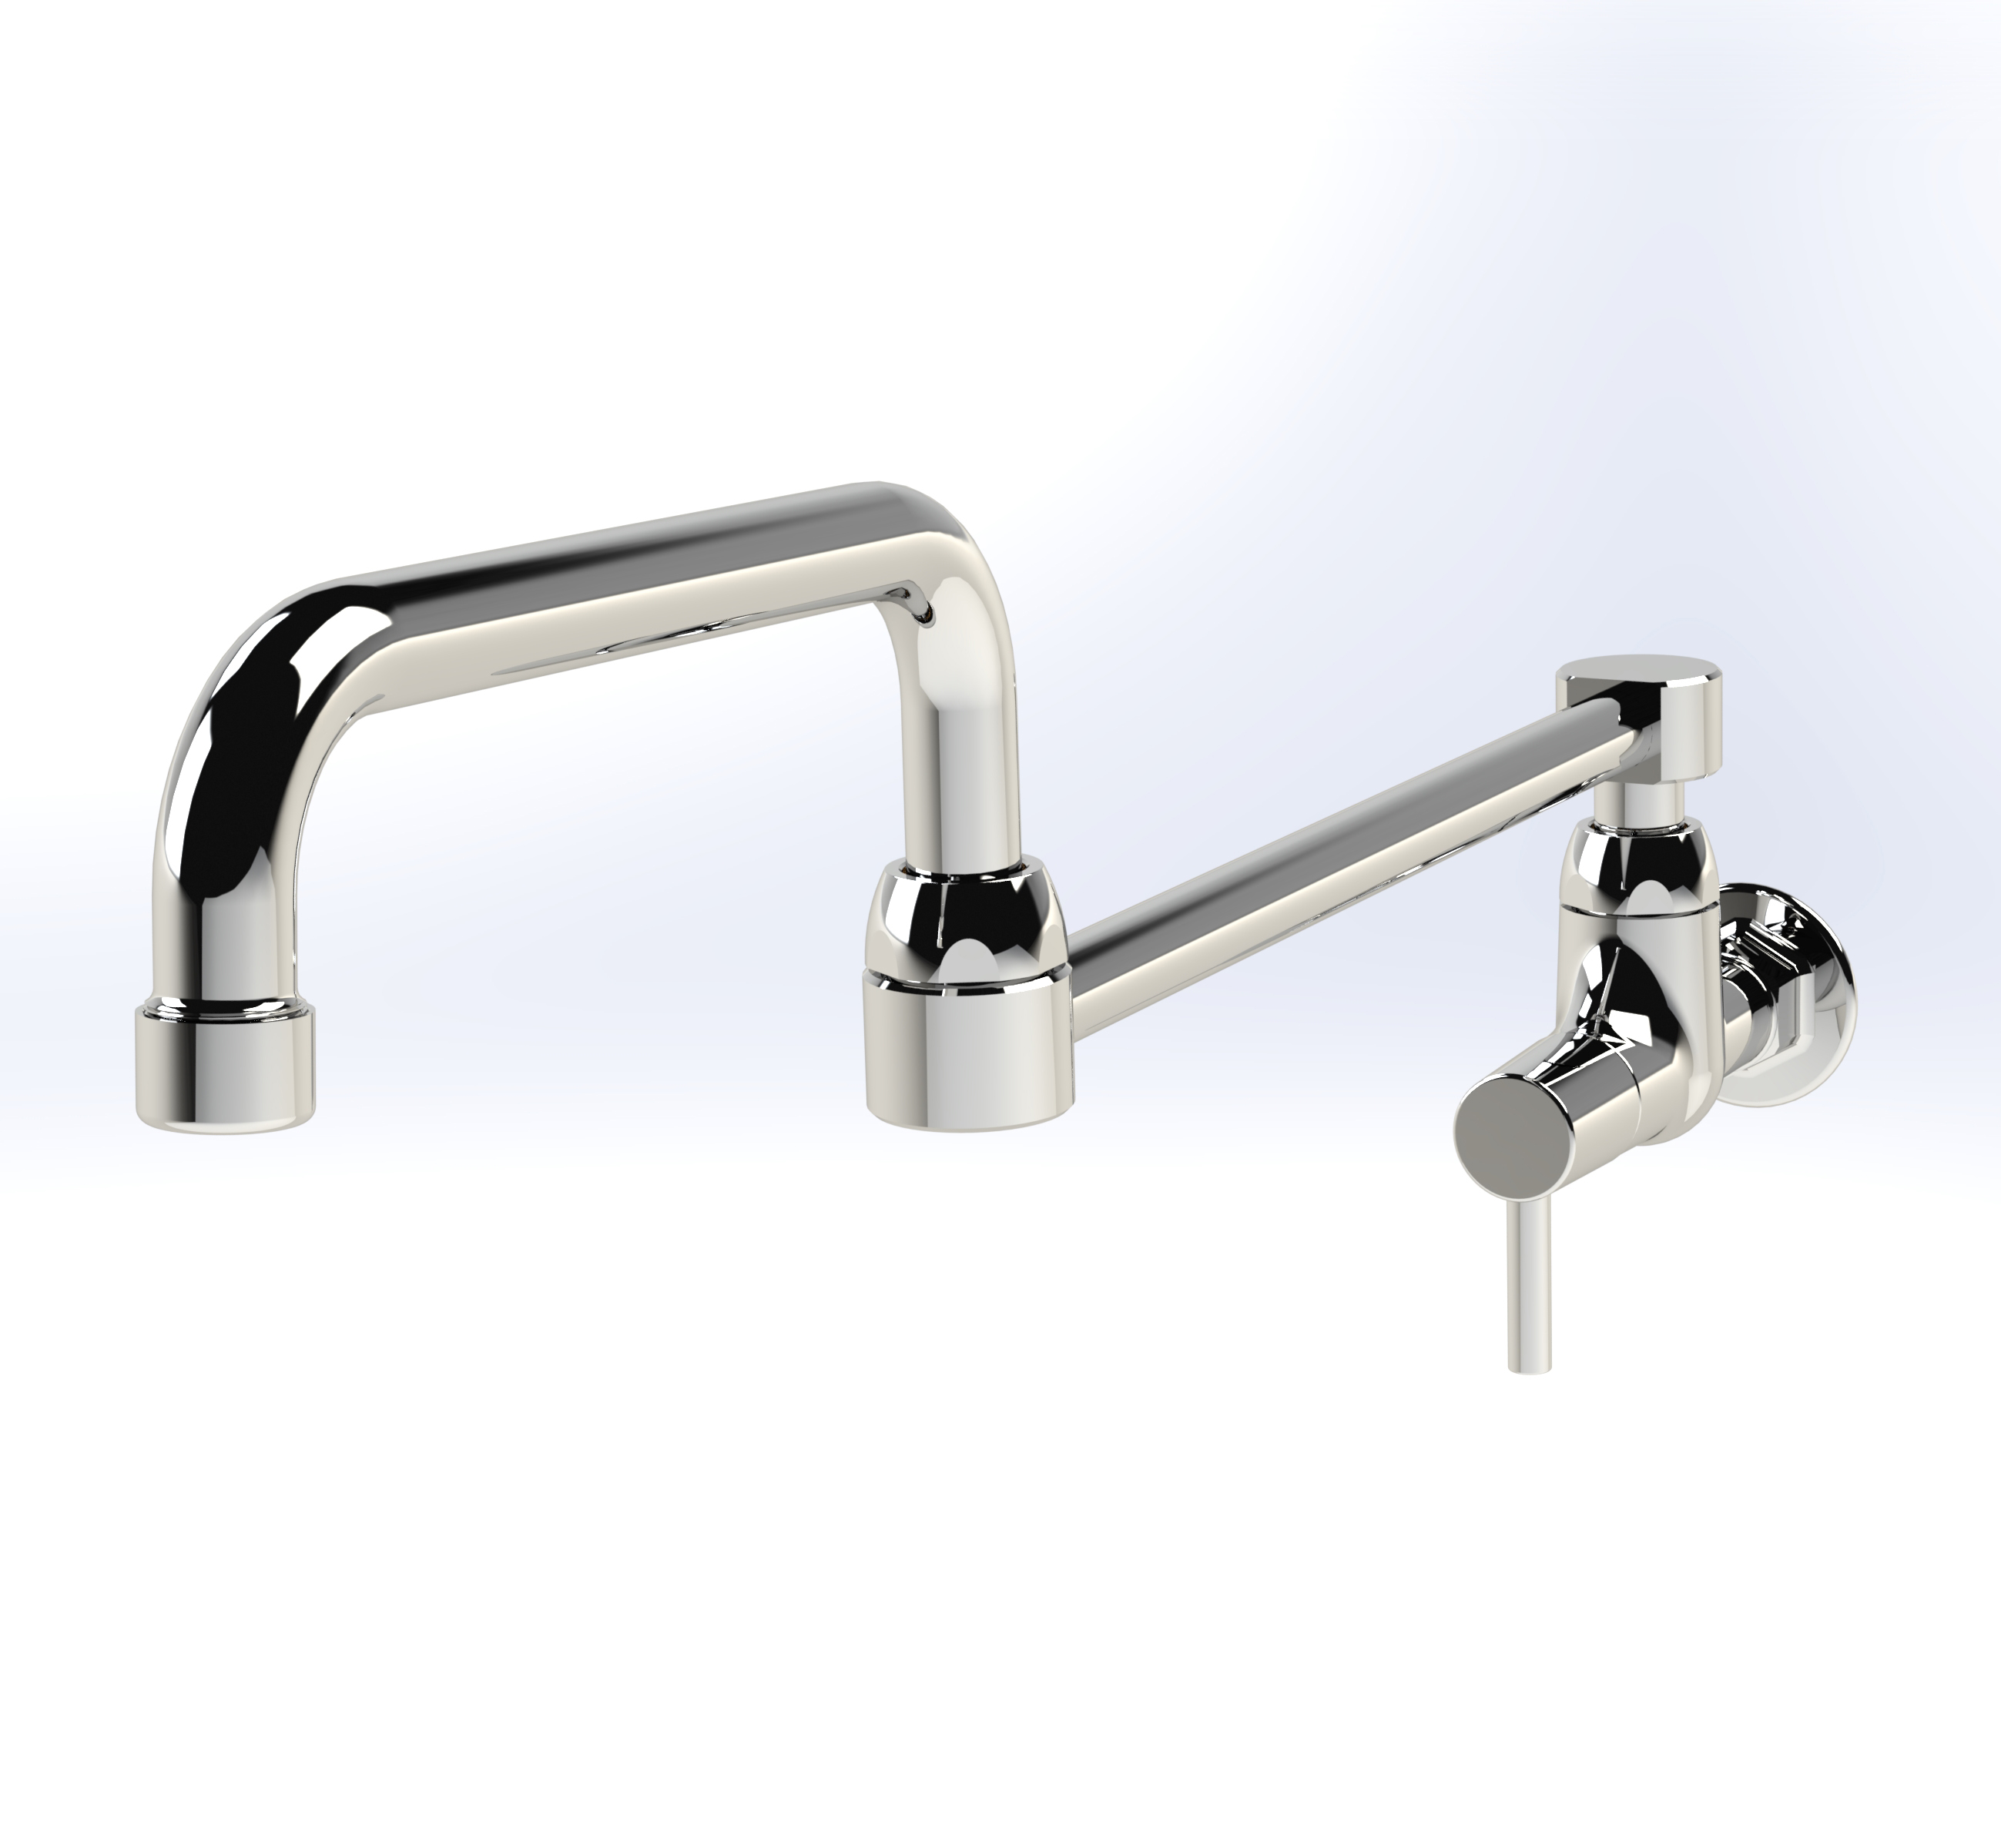 Pot Filler Faucet With a Single Hole Wall Mounted Control Valve